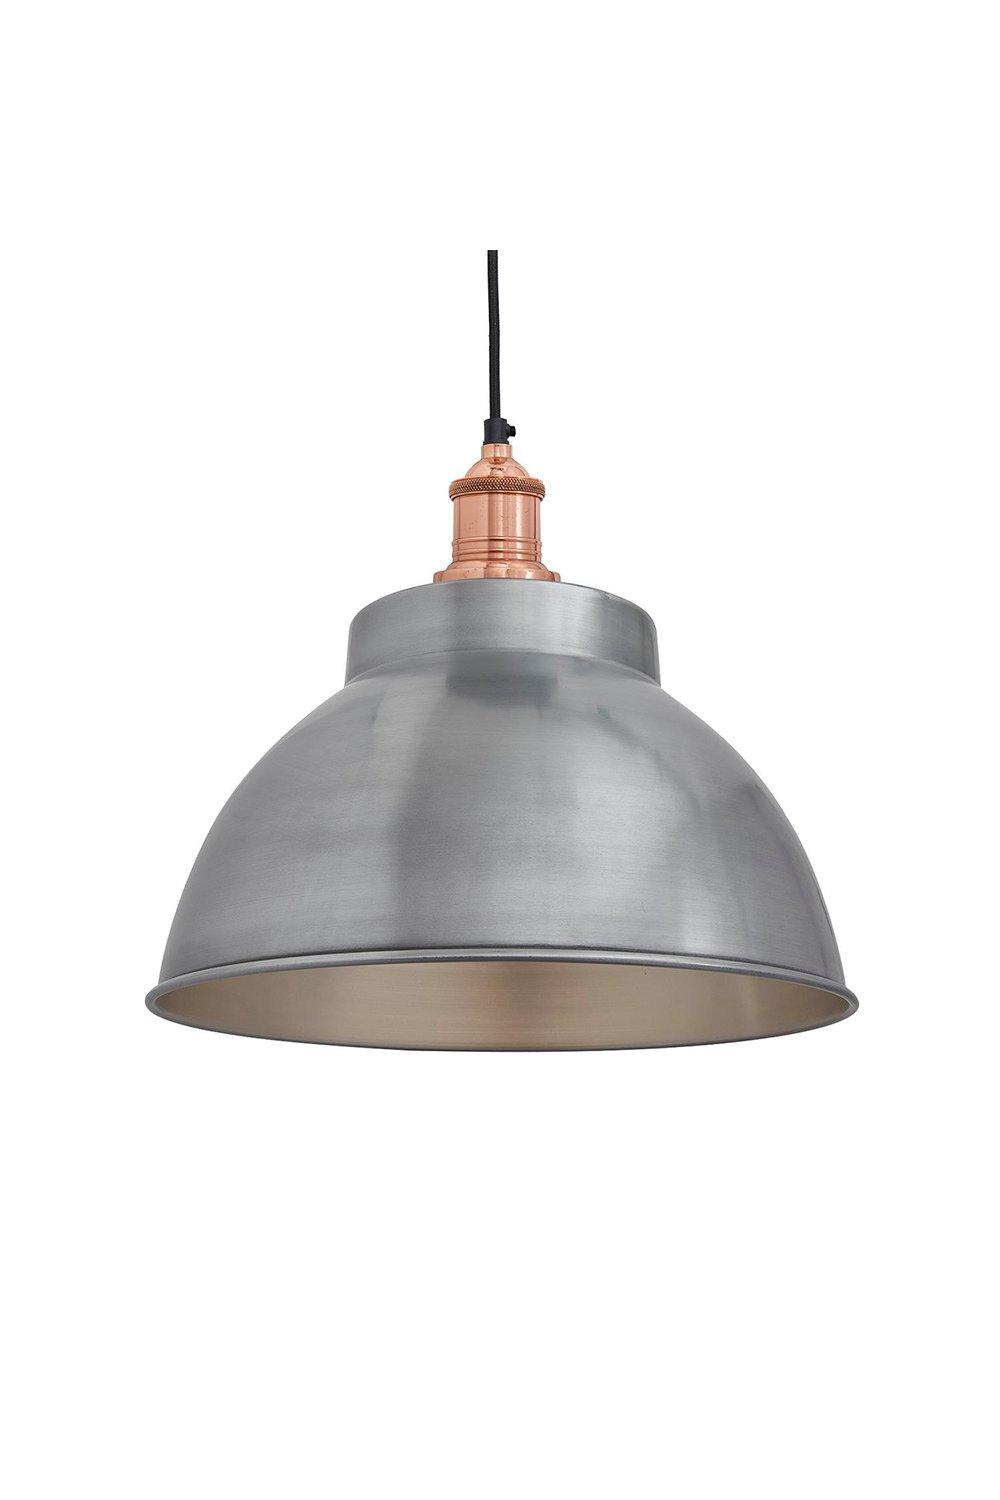 Brooklyn Dome Pendant, 13 Inch, Light Pewter, Copper Holder